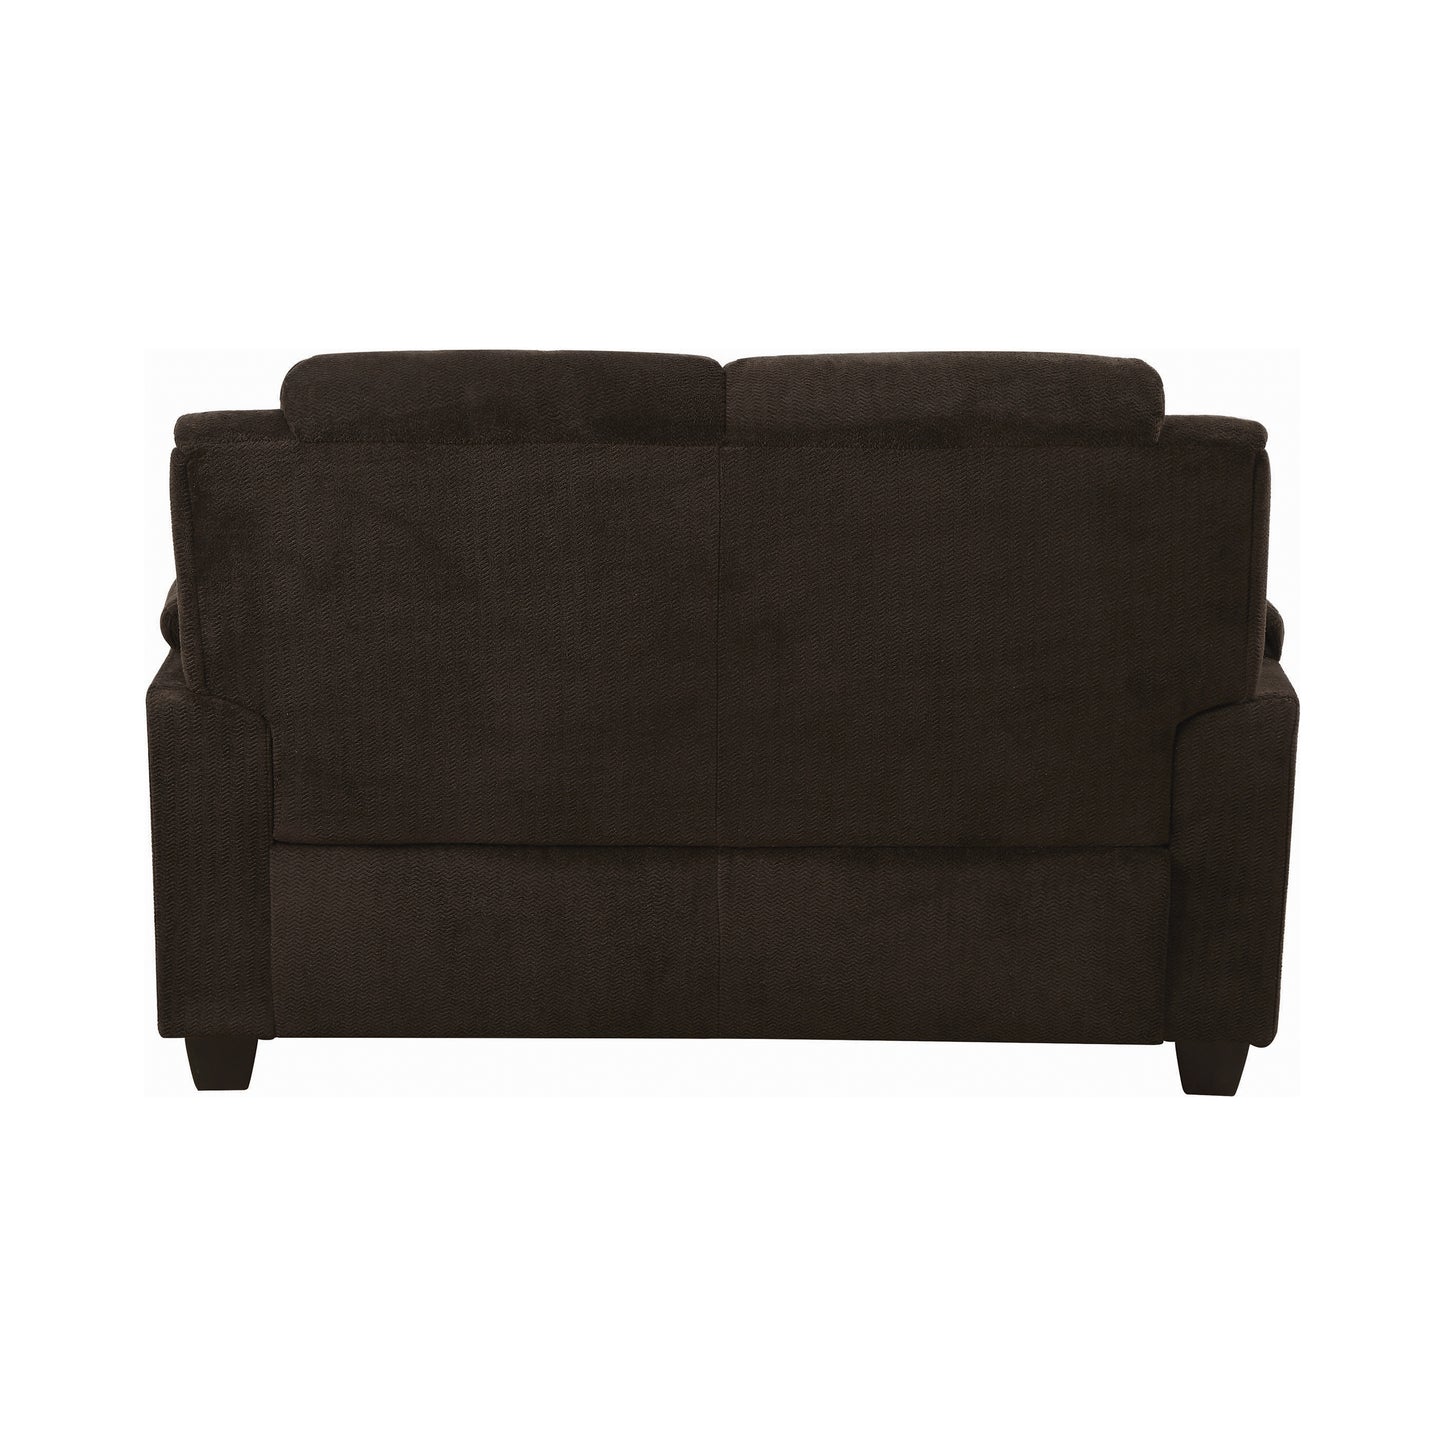 Northend Upholstered Loveseat Chocolate